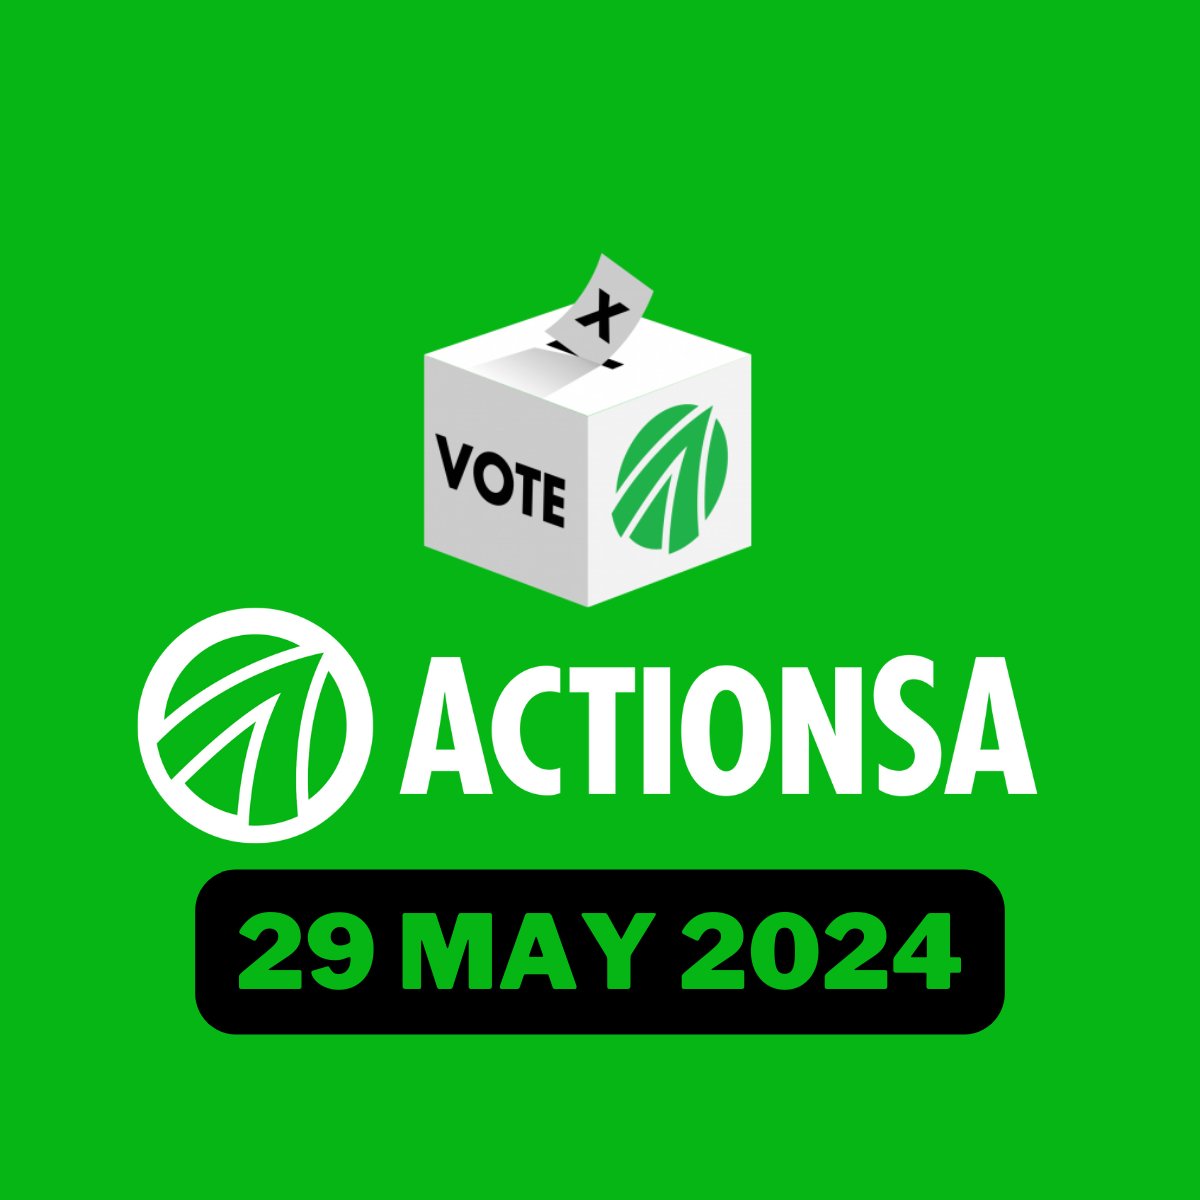 NO ONE MUST BE LEFT BEHIND

#VoteActionSA2024
#Let'sfixSA